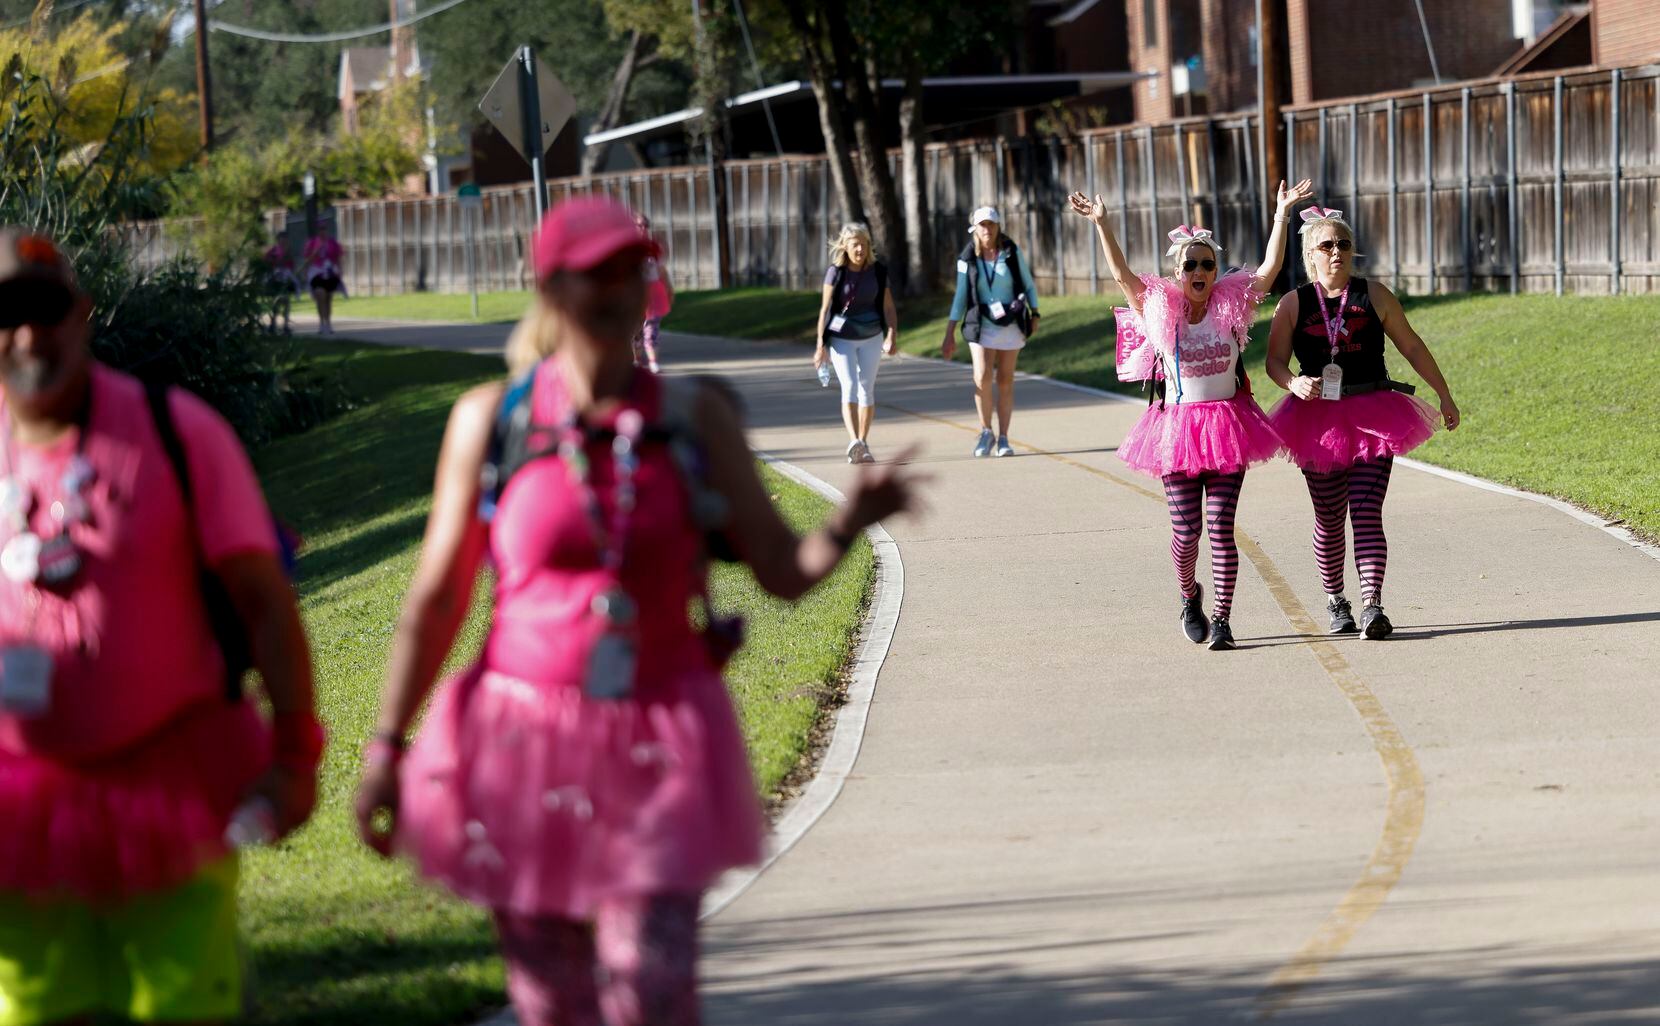 Breast cancer survivor Brenda Munden, second from right, and Melissa Muldowney walk on a...